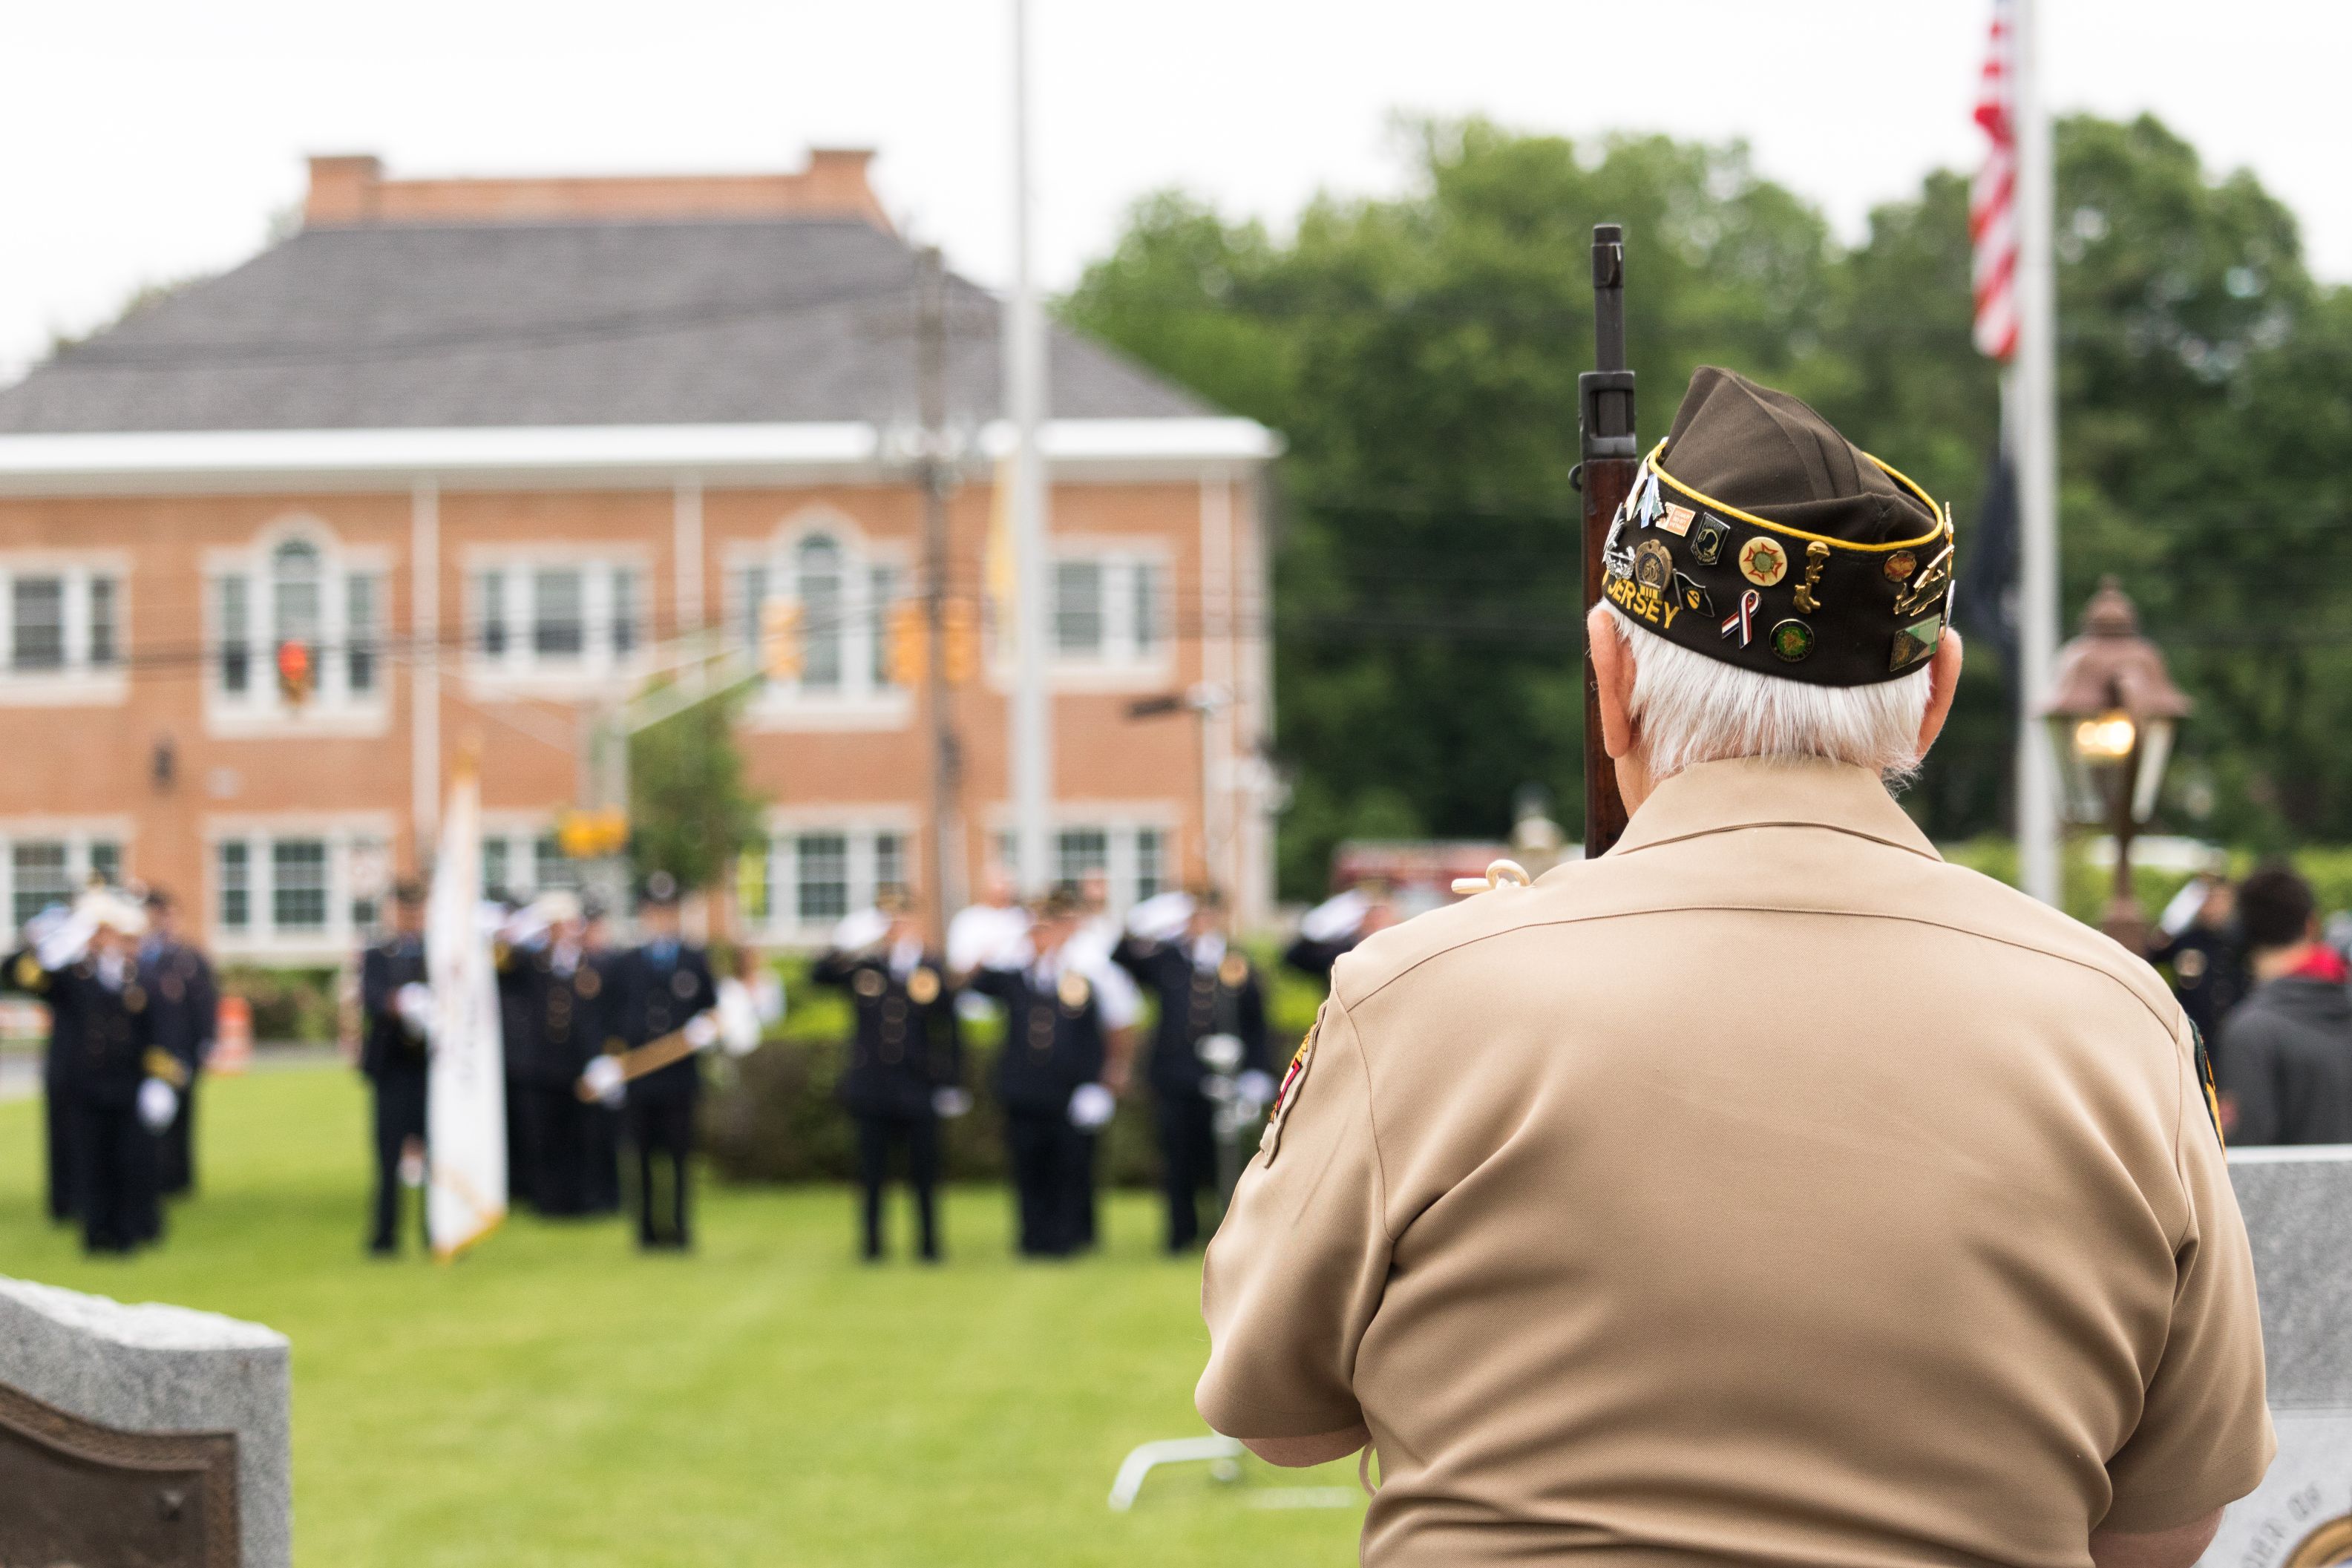 Livingston, NJ / United States - May 28 2018: A veteran pays his respect during a memorial service on Memorial Day.